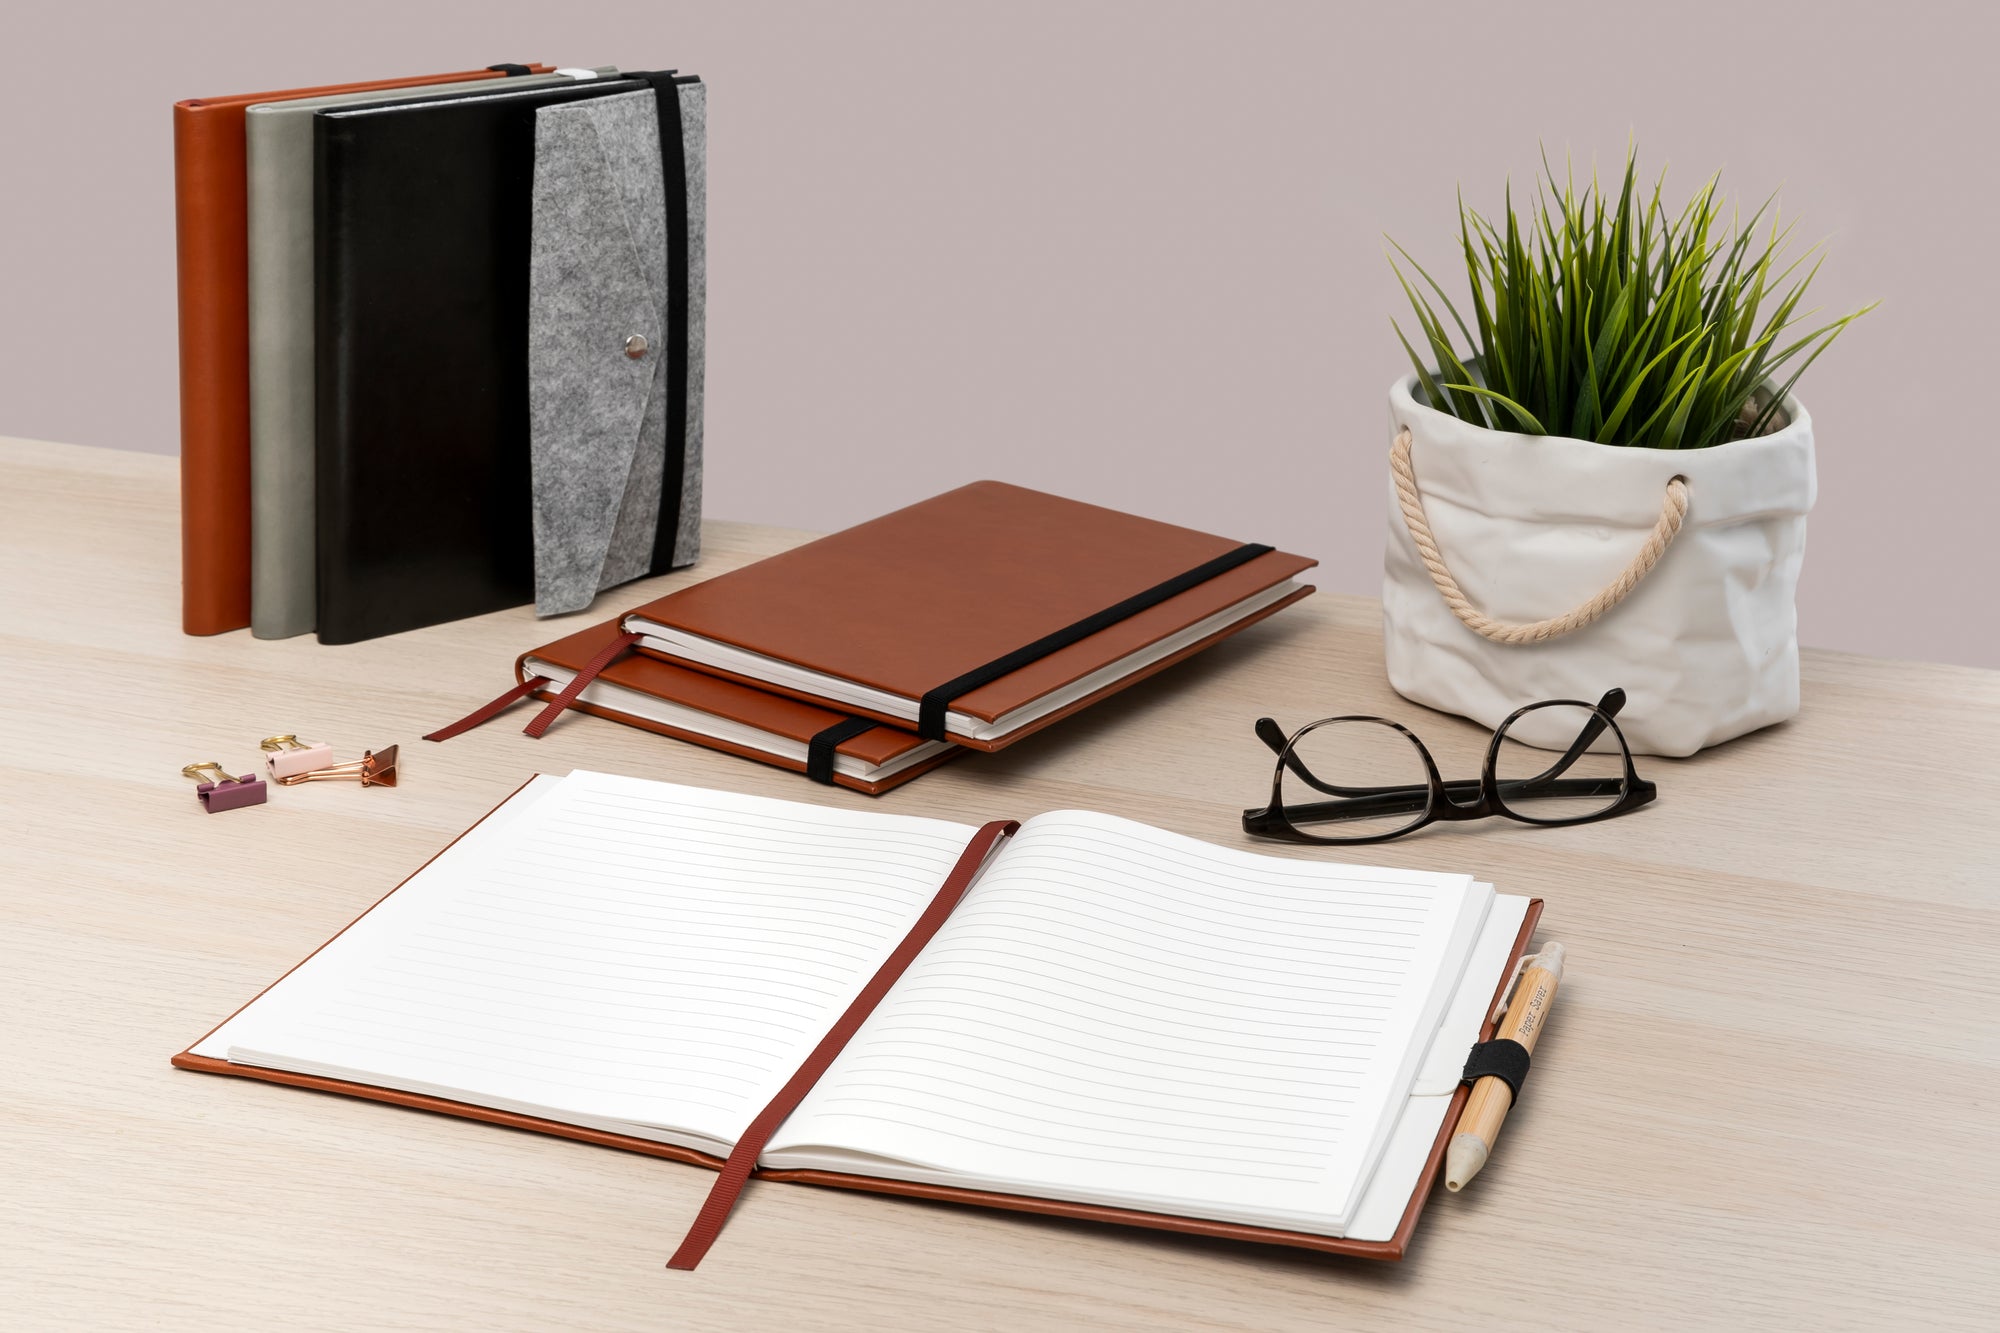 The Paper Saver Reusable Notebook is refillable with either your waste paper or our stone paper notebook refill so you can keep writing in your elegant notebook for less waste.